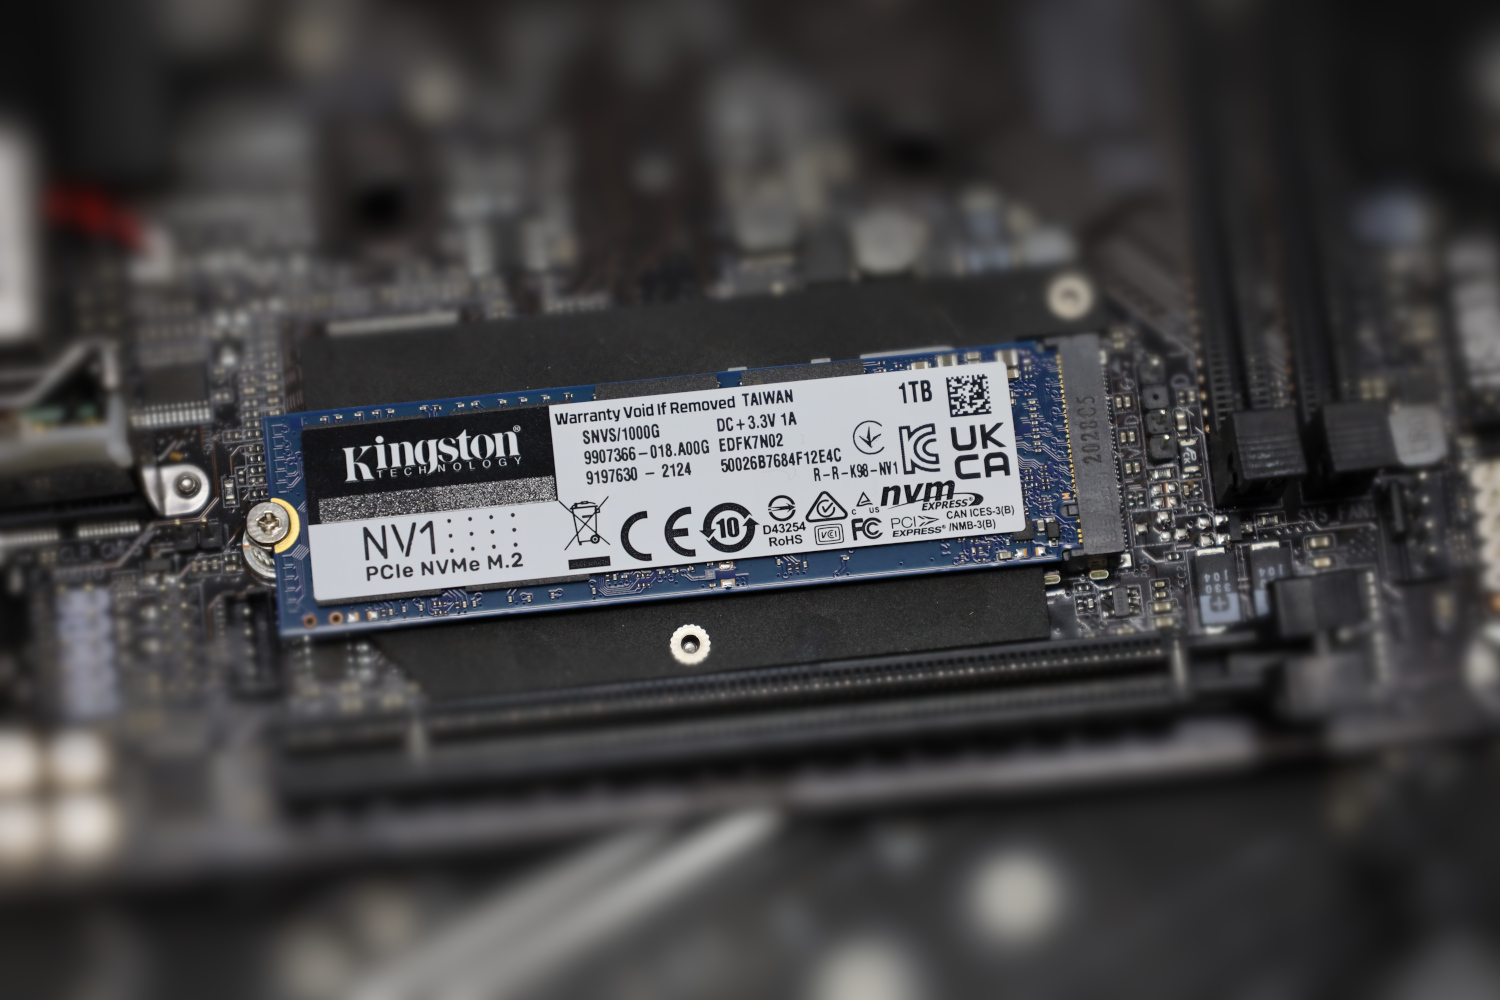 Kingston NV1 1 TB Review - Slow but Affordable